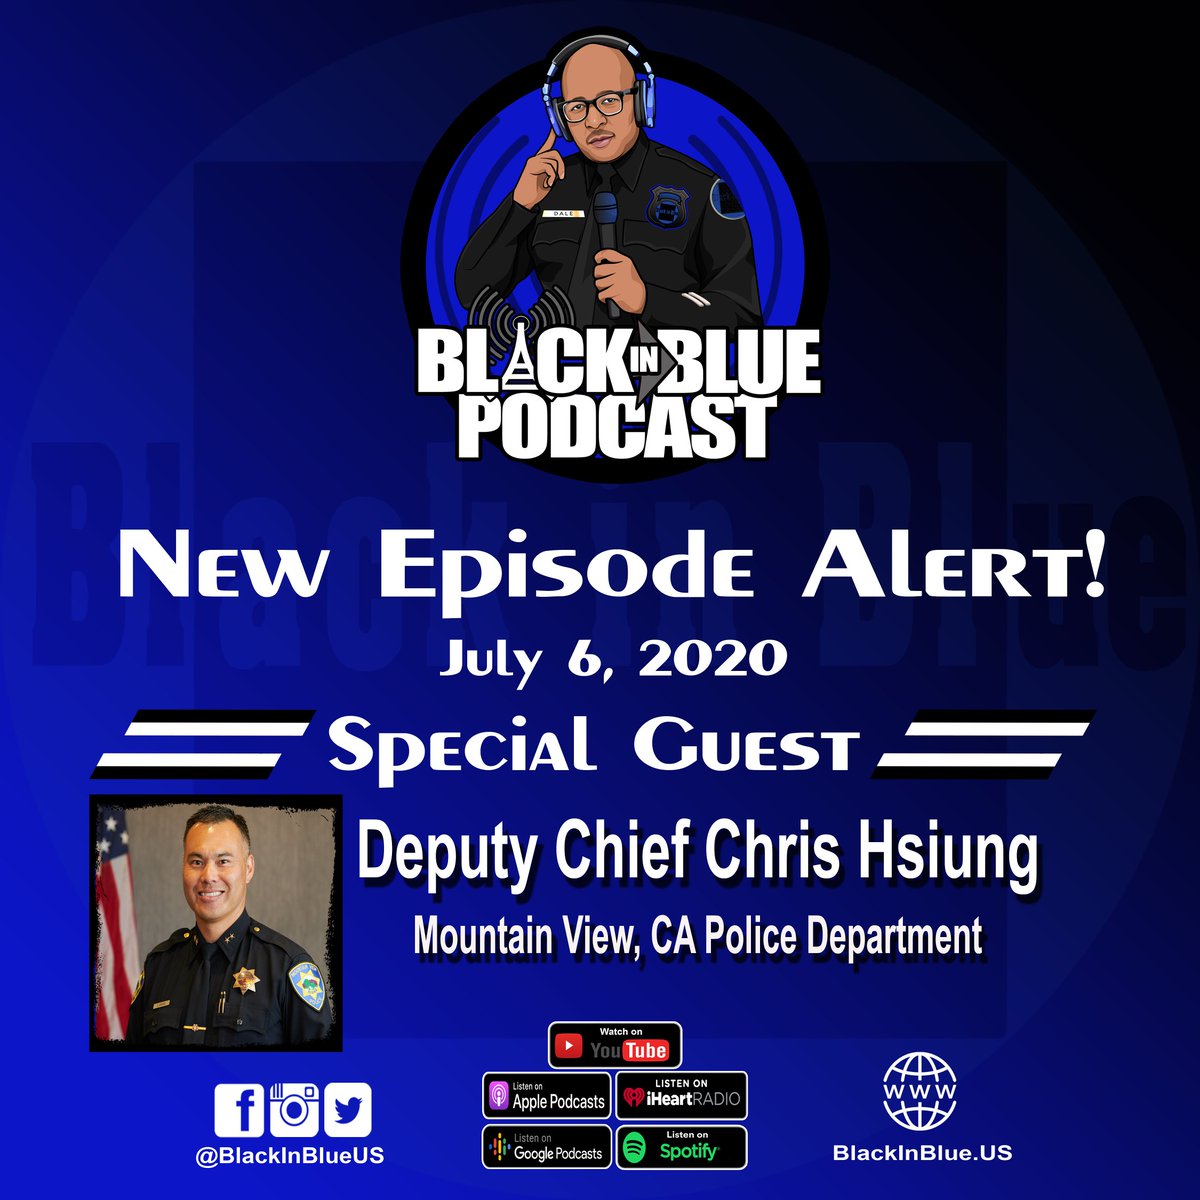 A new episode of the Black in Blue Podcast drops tomorrow! Check it out on all the major podcast platforms and YouTube!
.
.
#NextEpisode #Podcast #ChineseAmerican #PoliceLeader #DeputyChief #MountainViewCalifornia